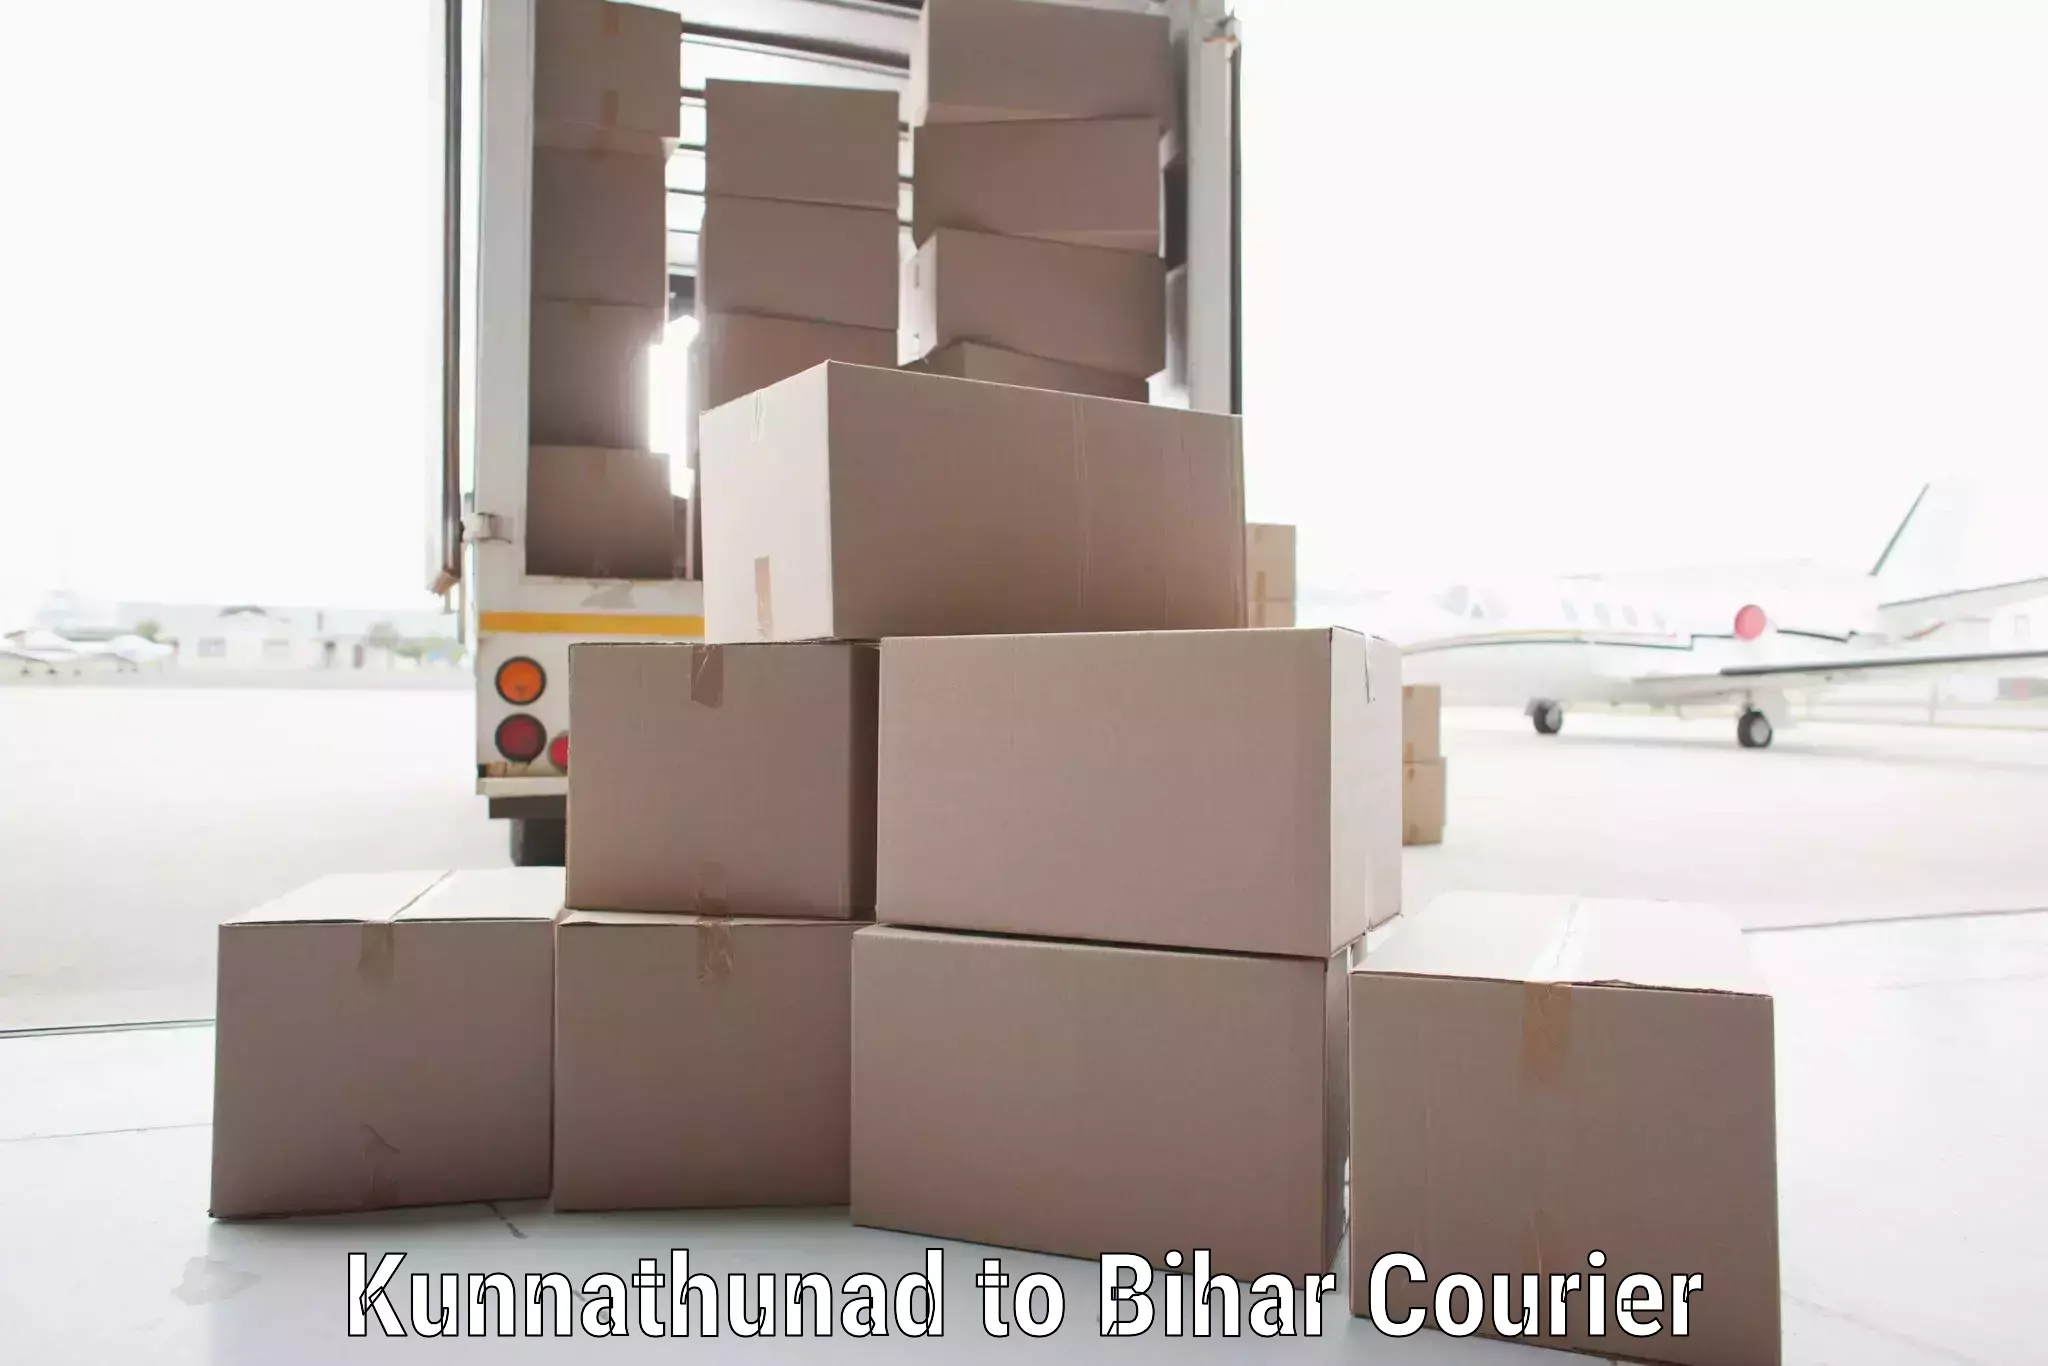 Parcel service for businesses Kunnathunad to Ghanshyampur